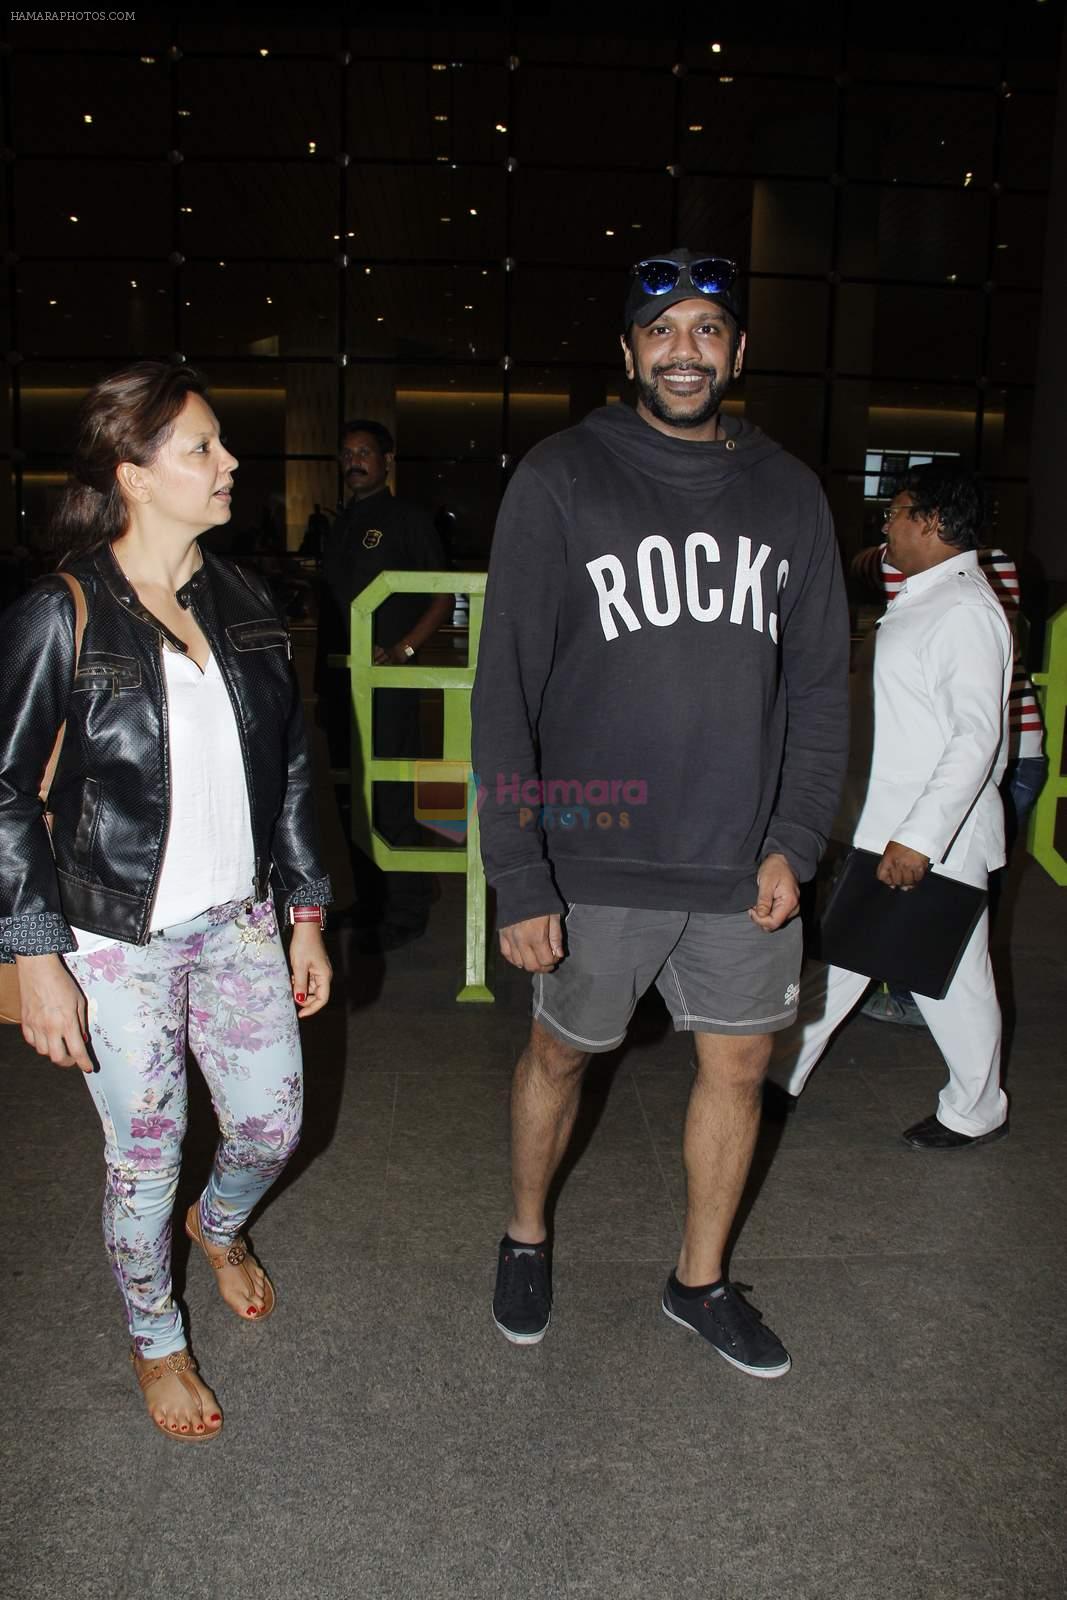 Rocky S arrive from IIFA on 8th June 2015